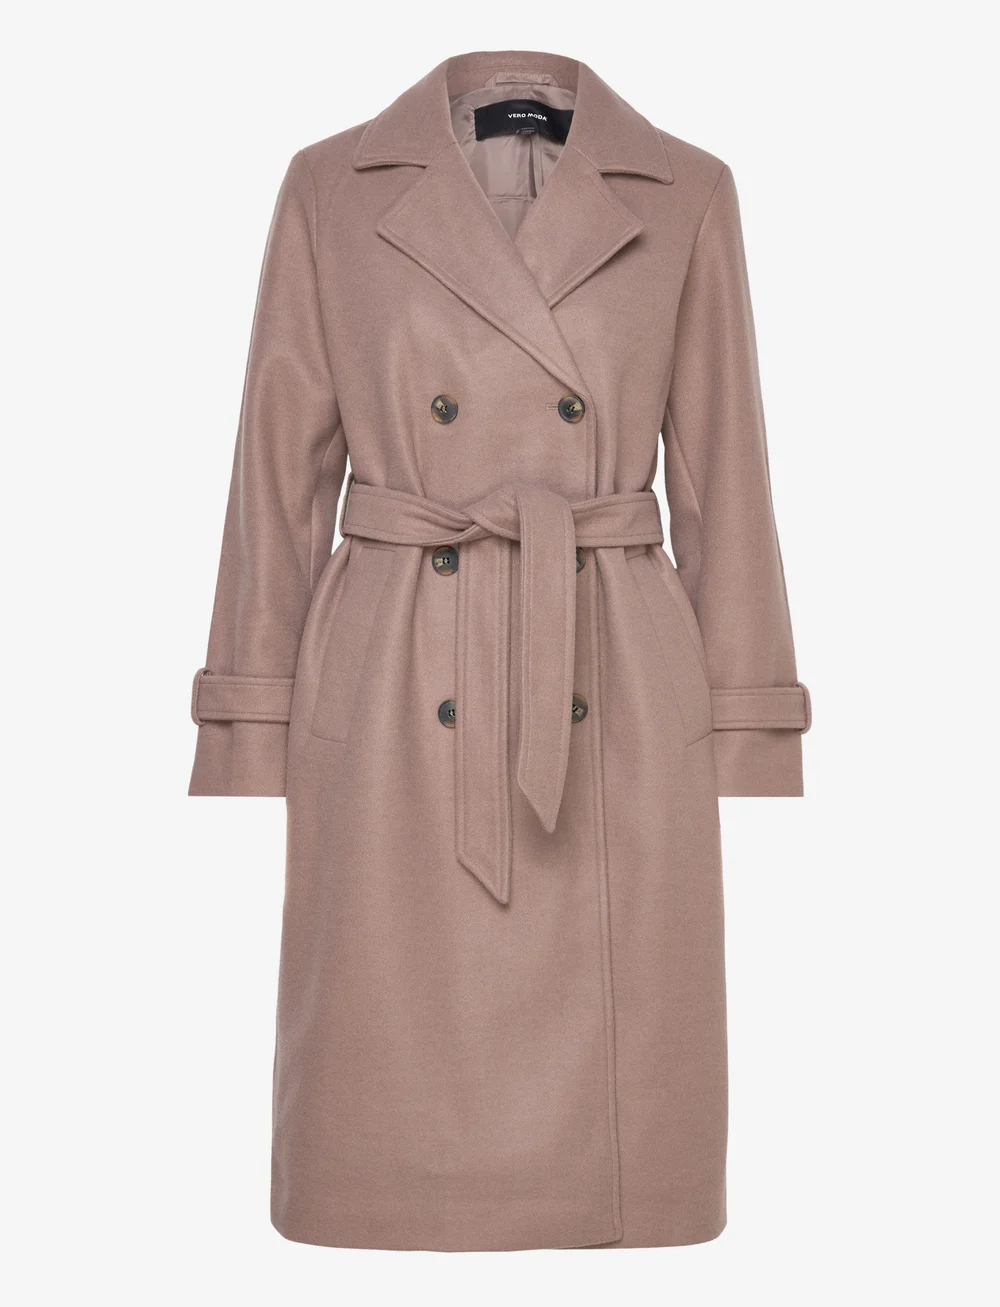 Vero Moda Vmfortunevega Aw23 Longtrenchcoat Gaboos - 79.99 €. Buy Winter  Coats from Vero Moda online at . Fast delivery and easy returns